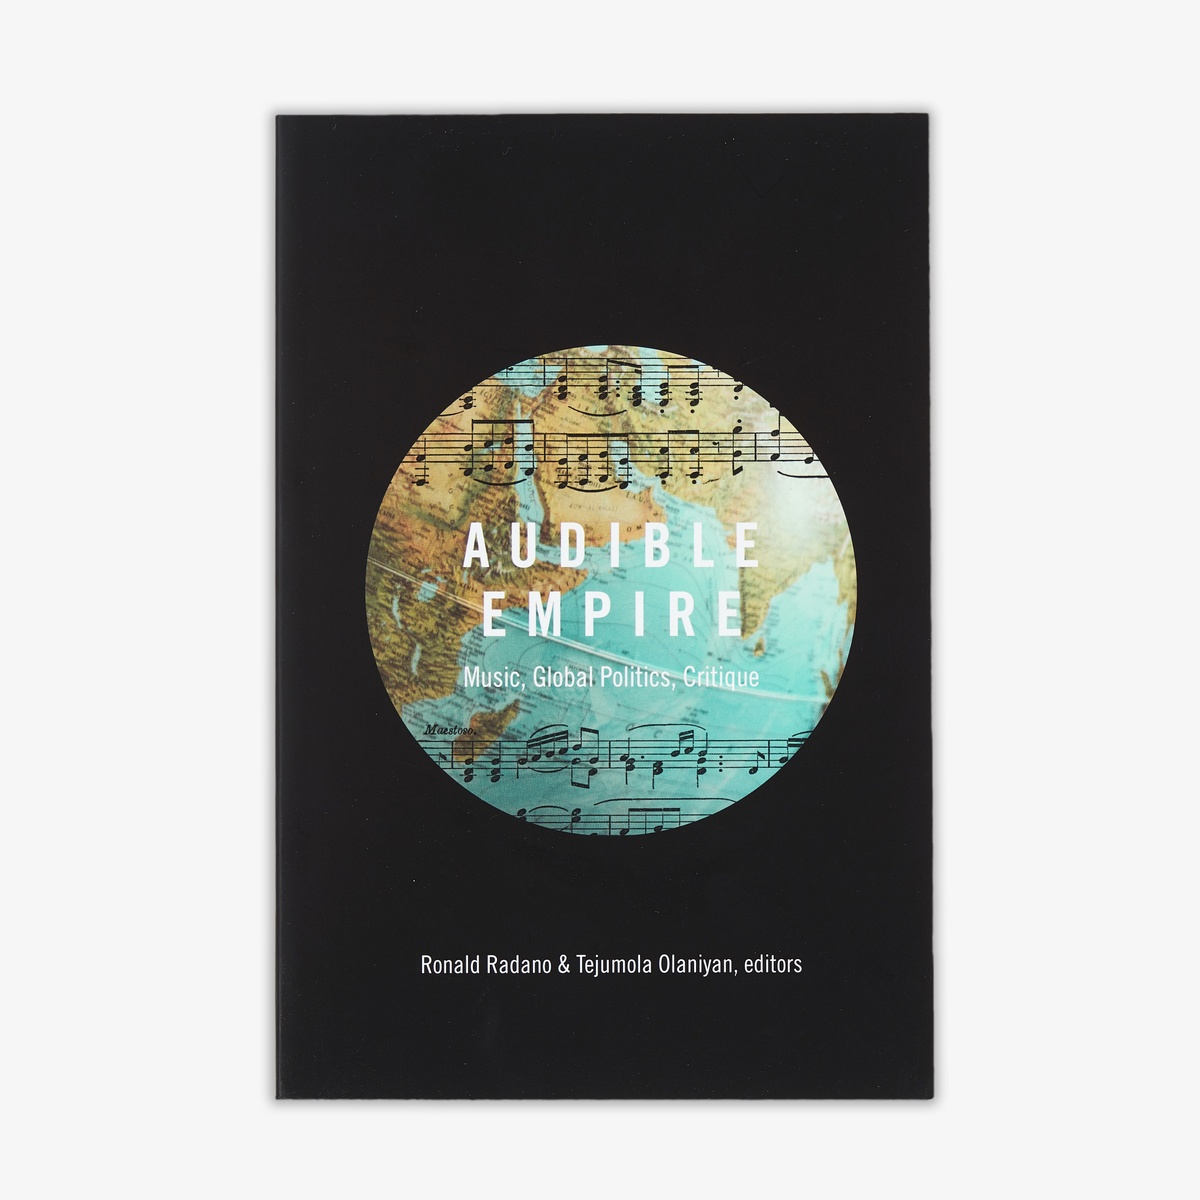 Photograph of the cover of Ronald Radano and Tejumola Olaniyan's edited volume 'Audible Empire: Music, Global Politics, Critique'.
